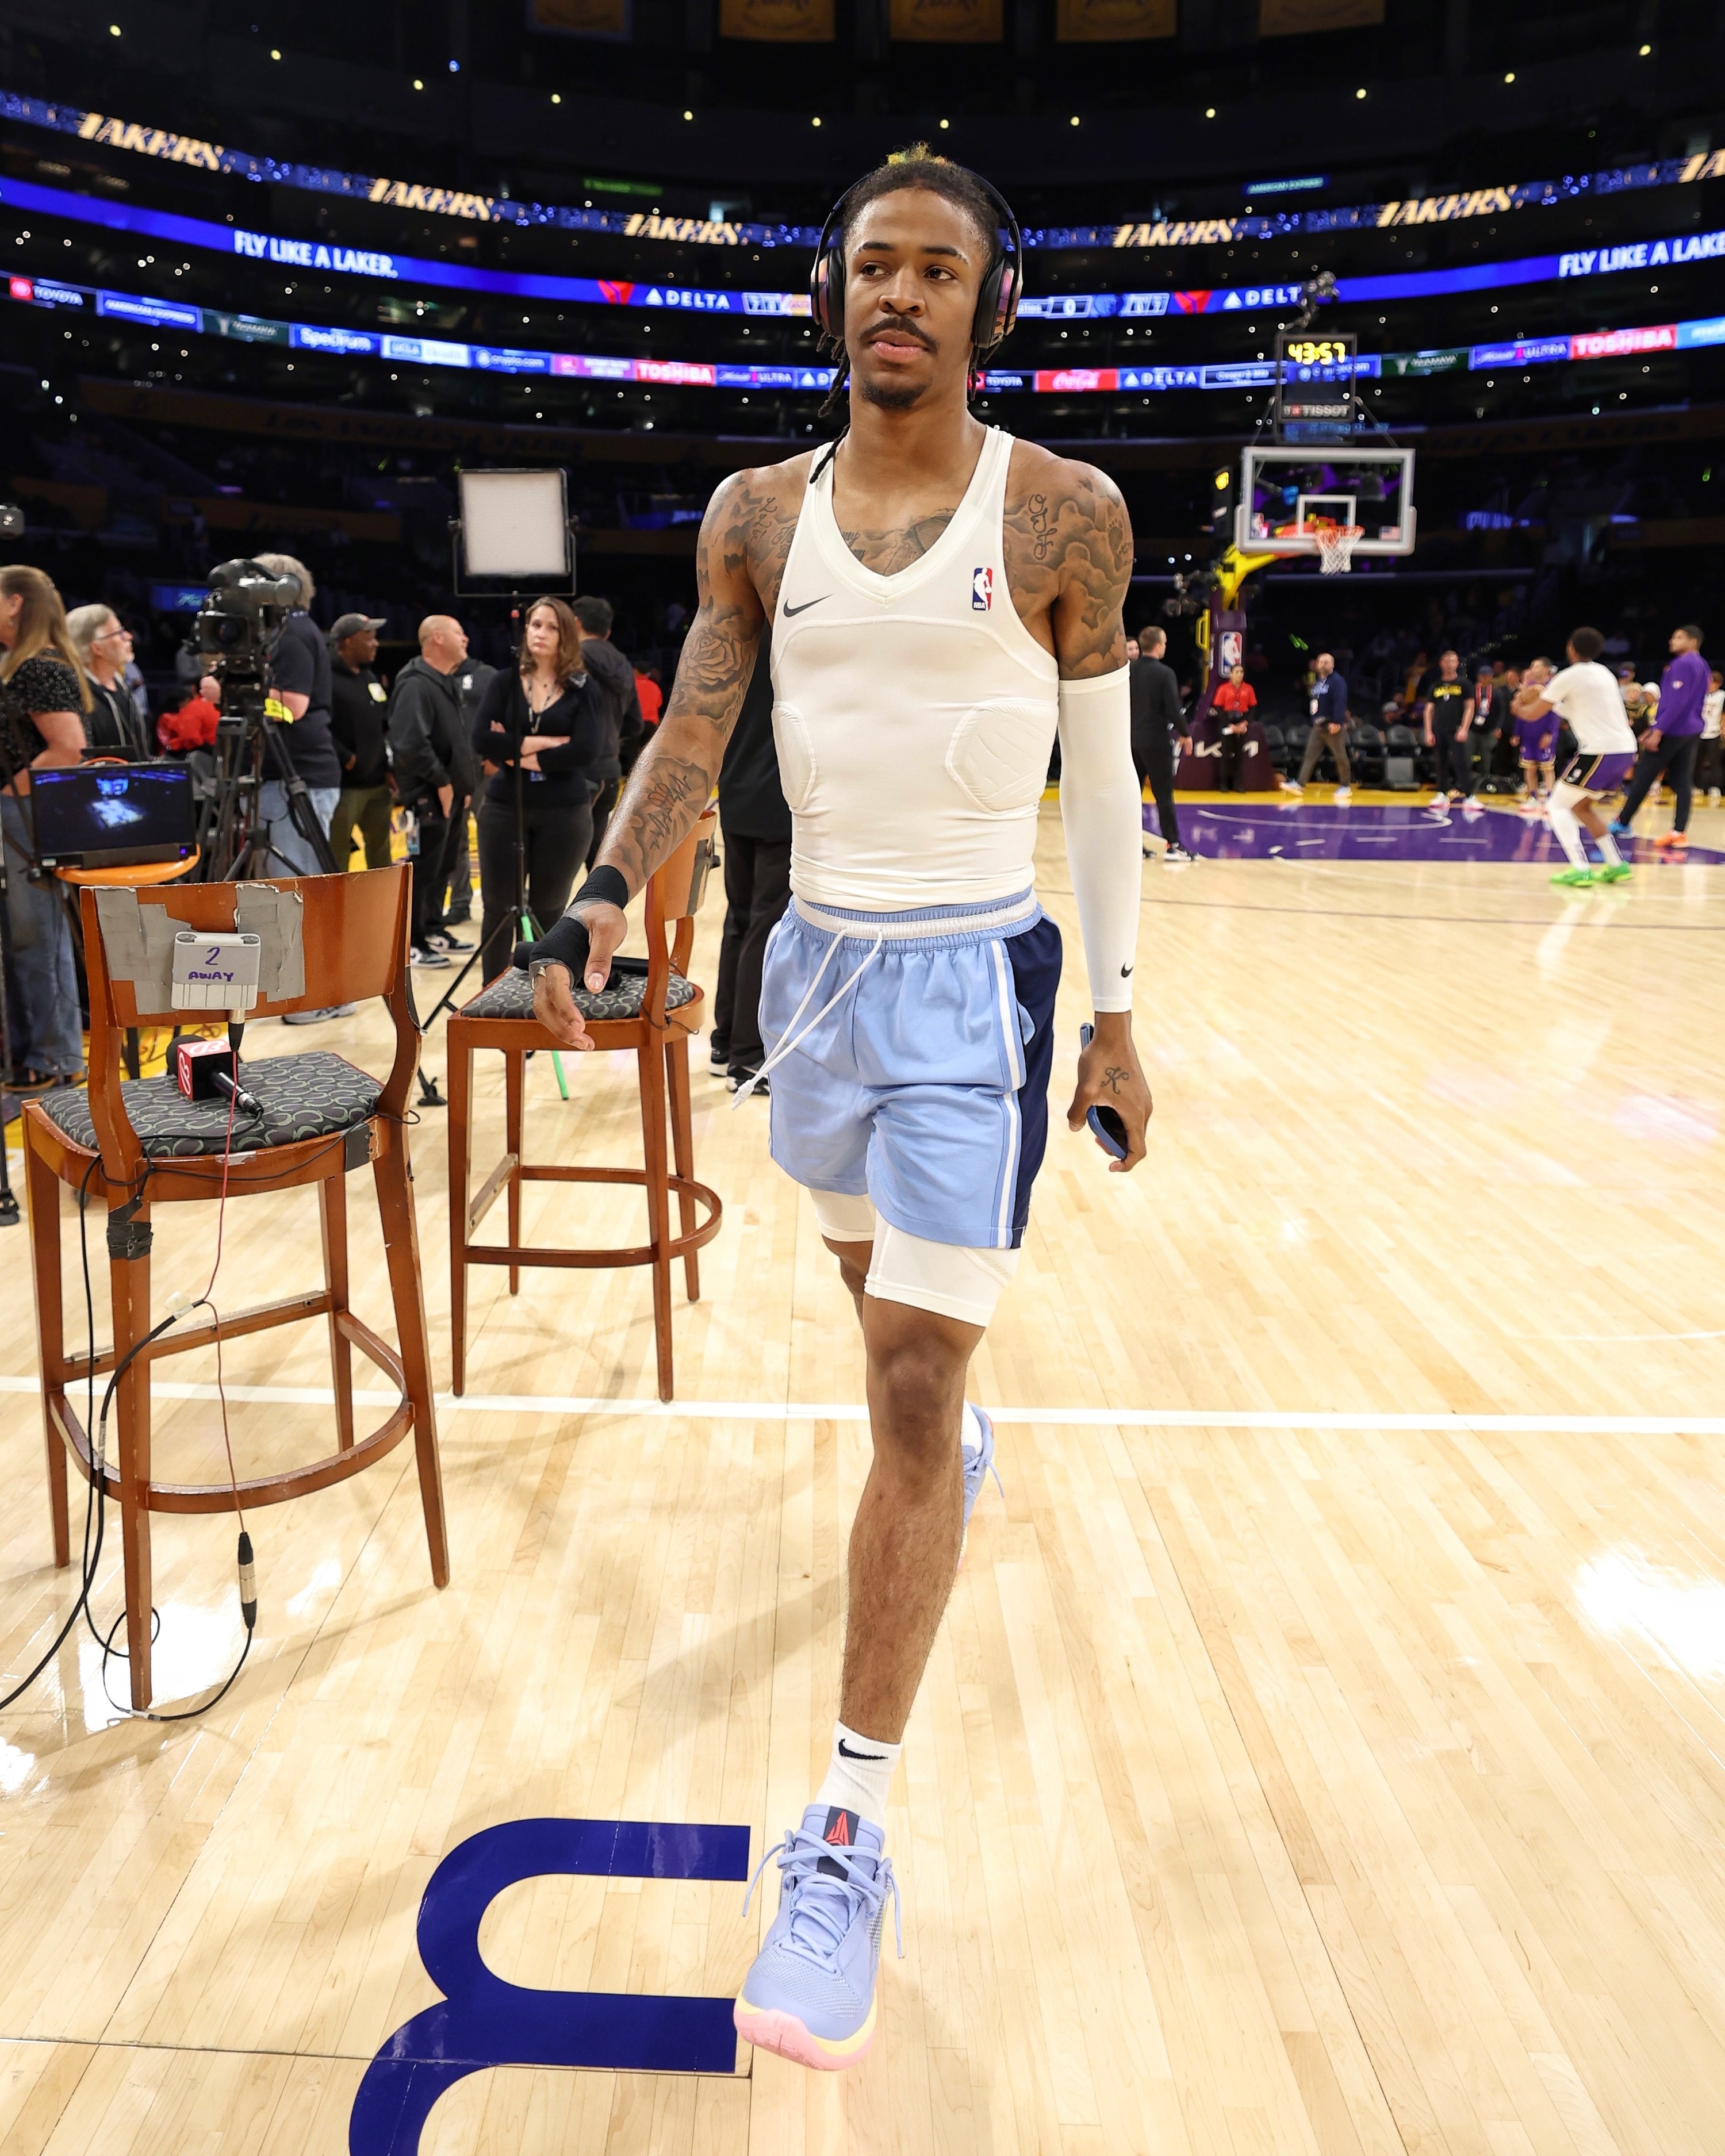 I take full accountability for my actions - Ja Morant releases statement  after facing massive backlash over gun incident